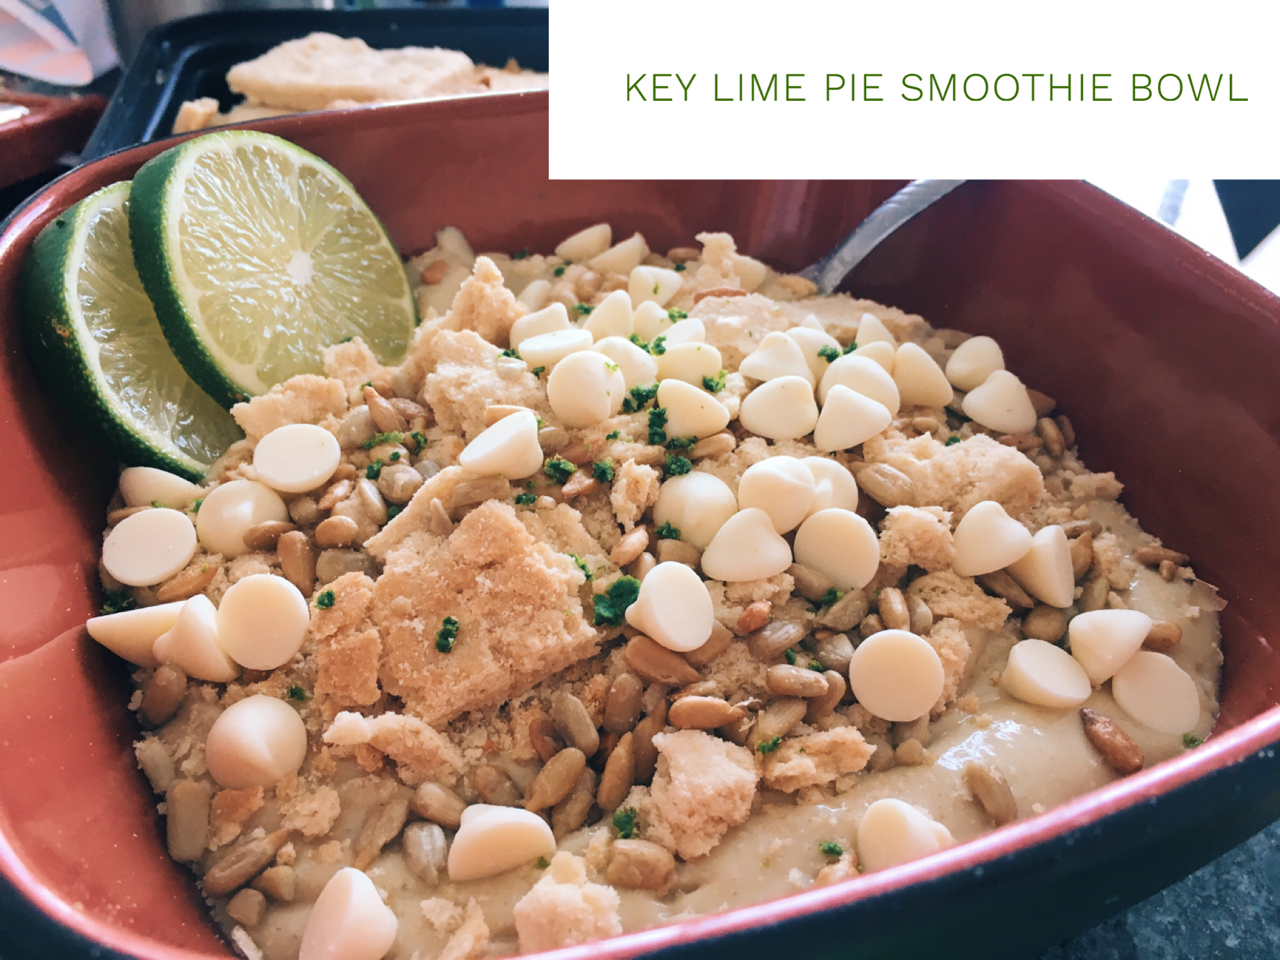 Picture of a key lime pie smoothie bowl